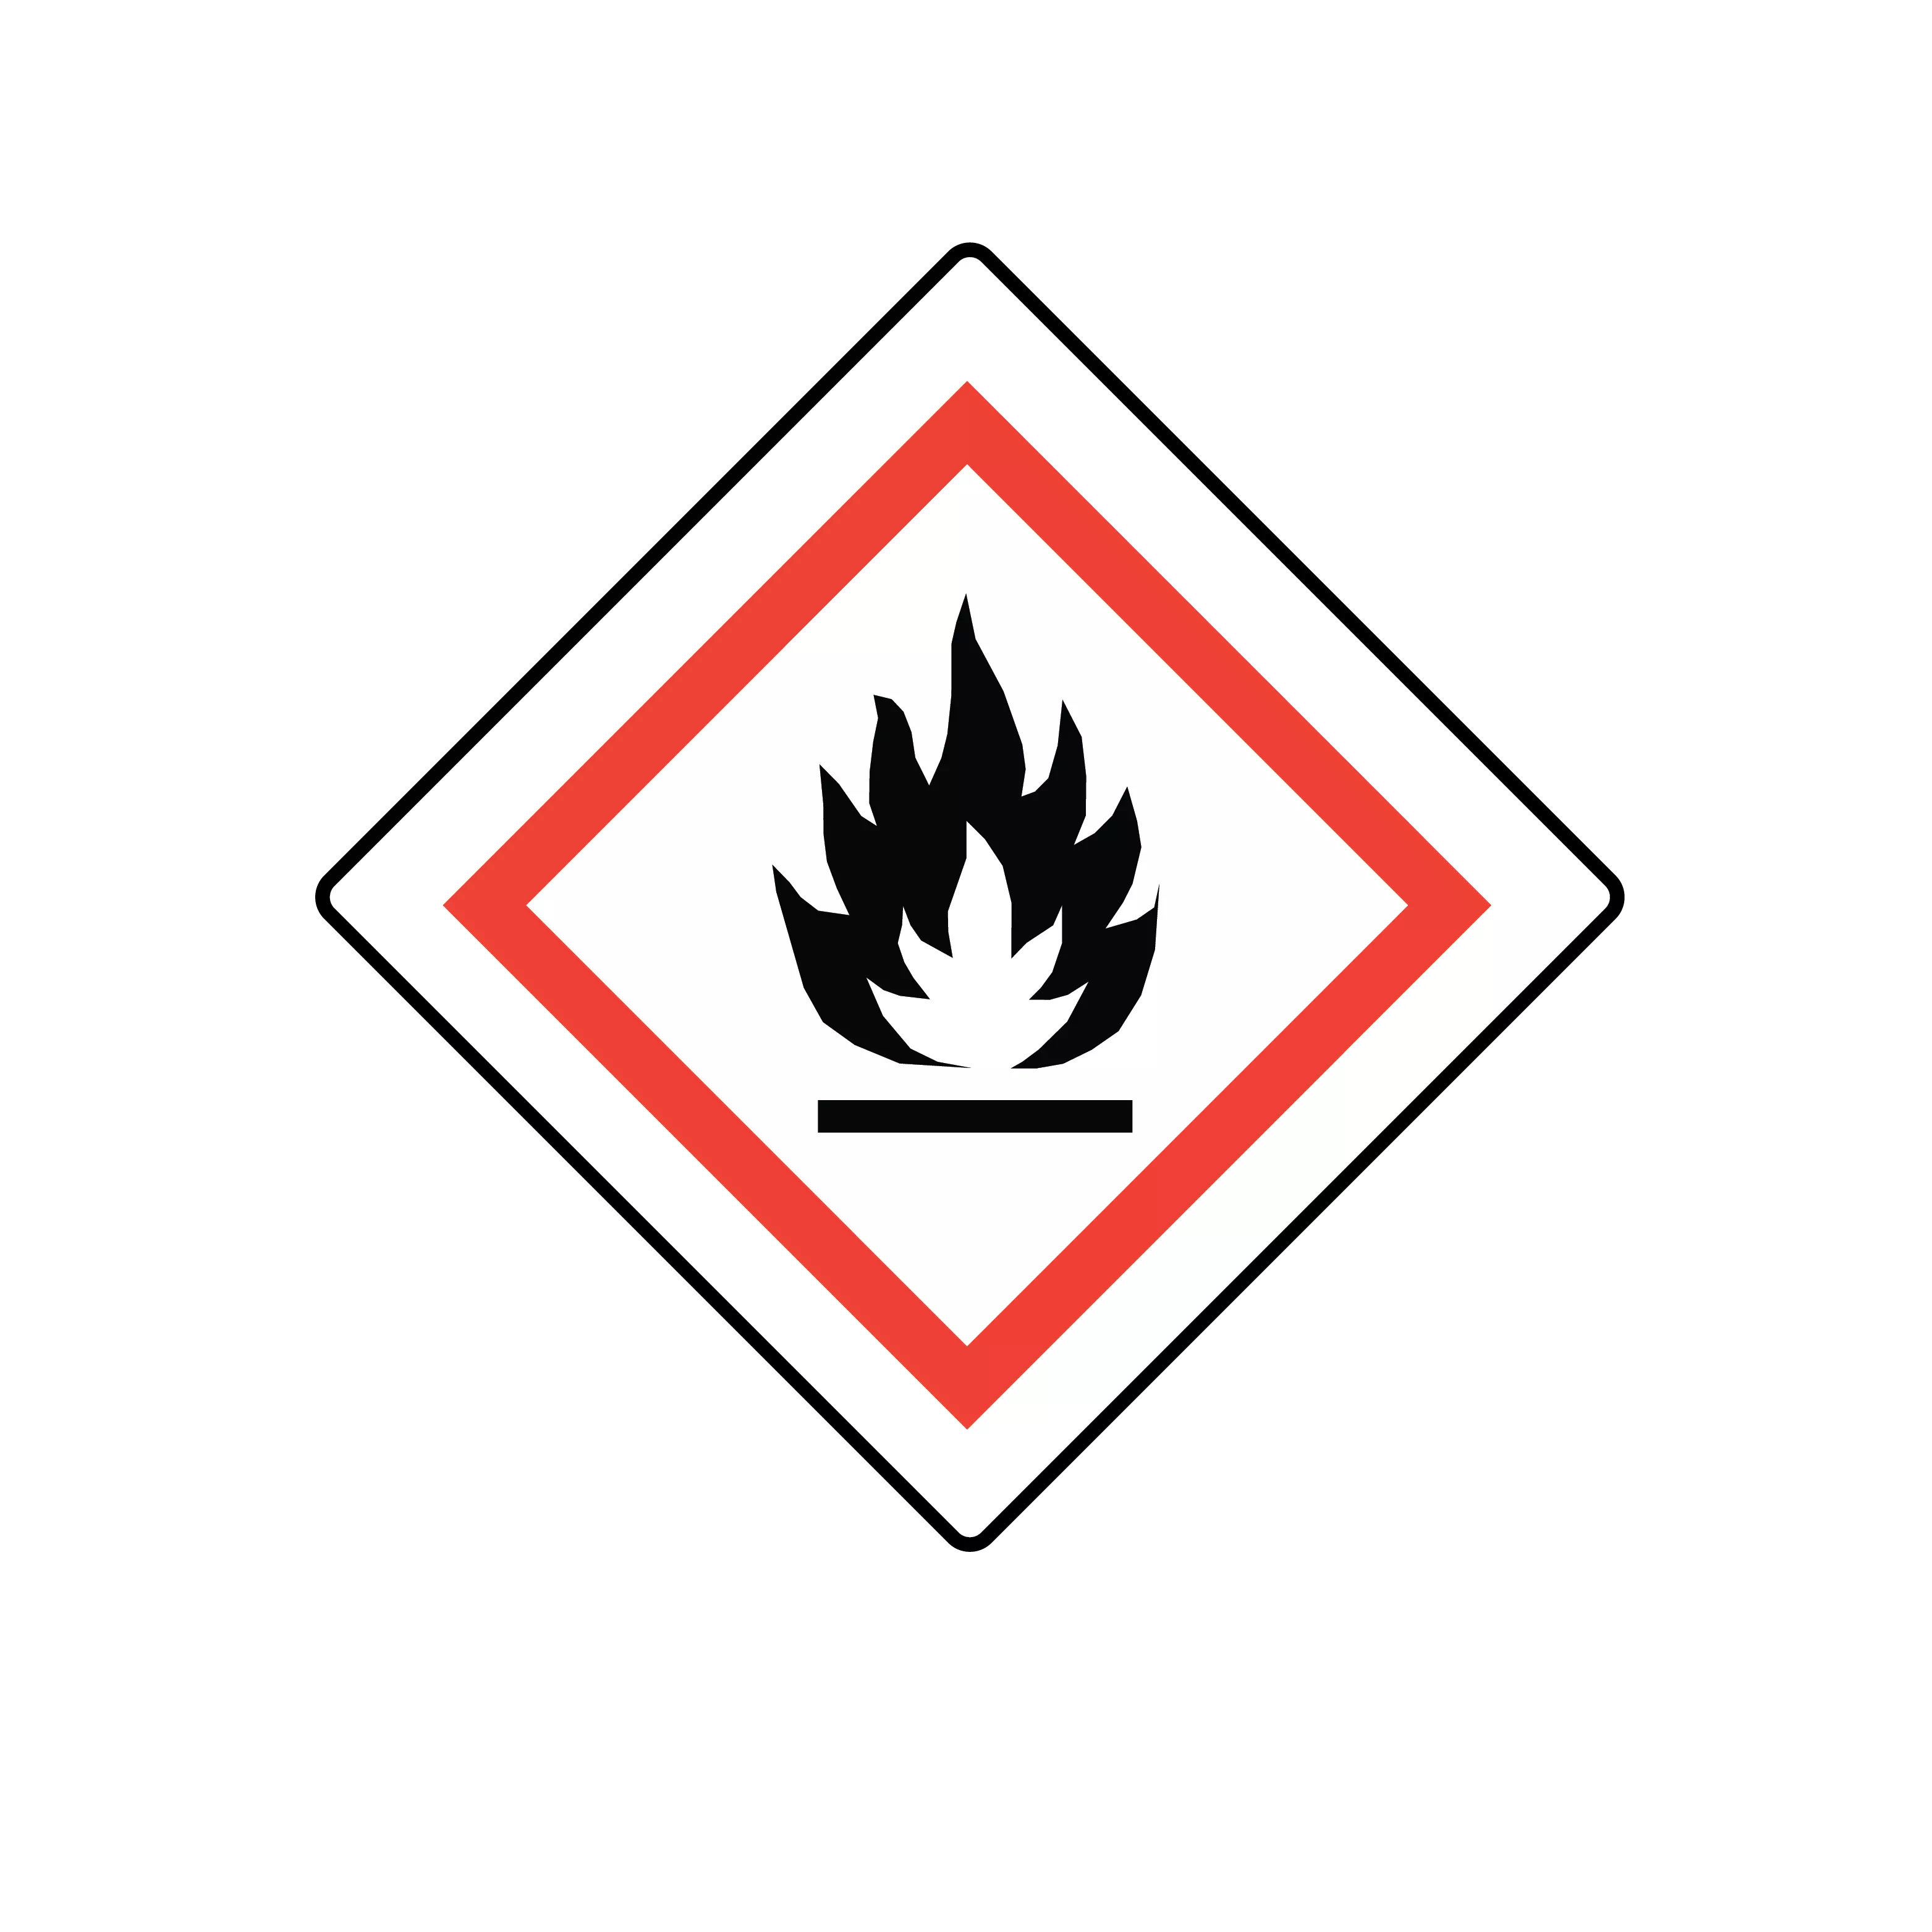 GHS Pictogram Label - Flammable